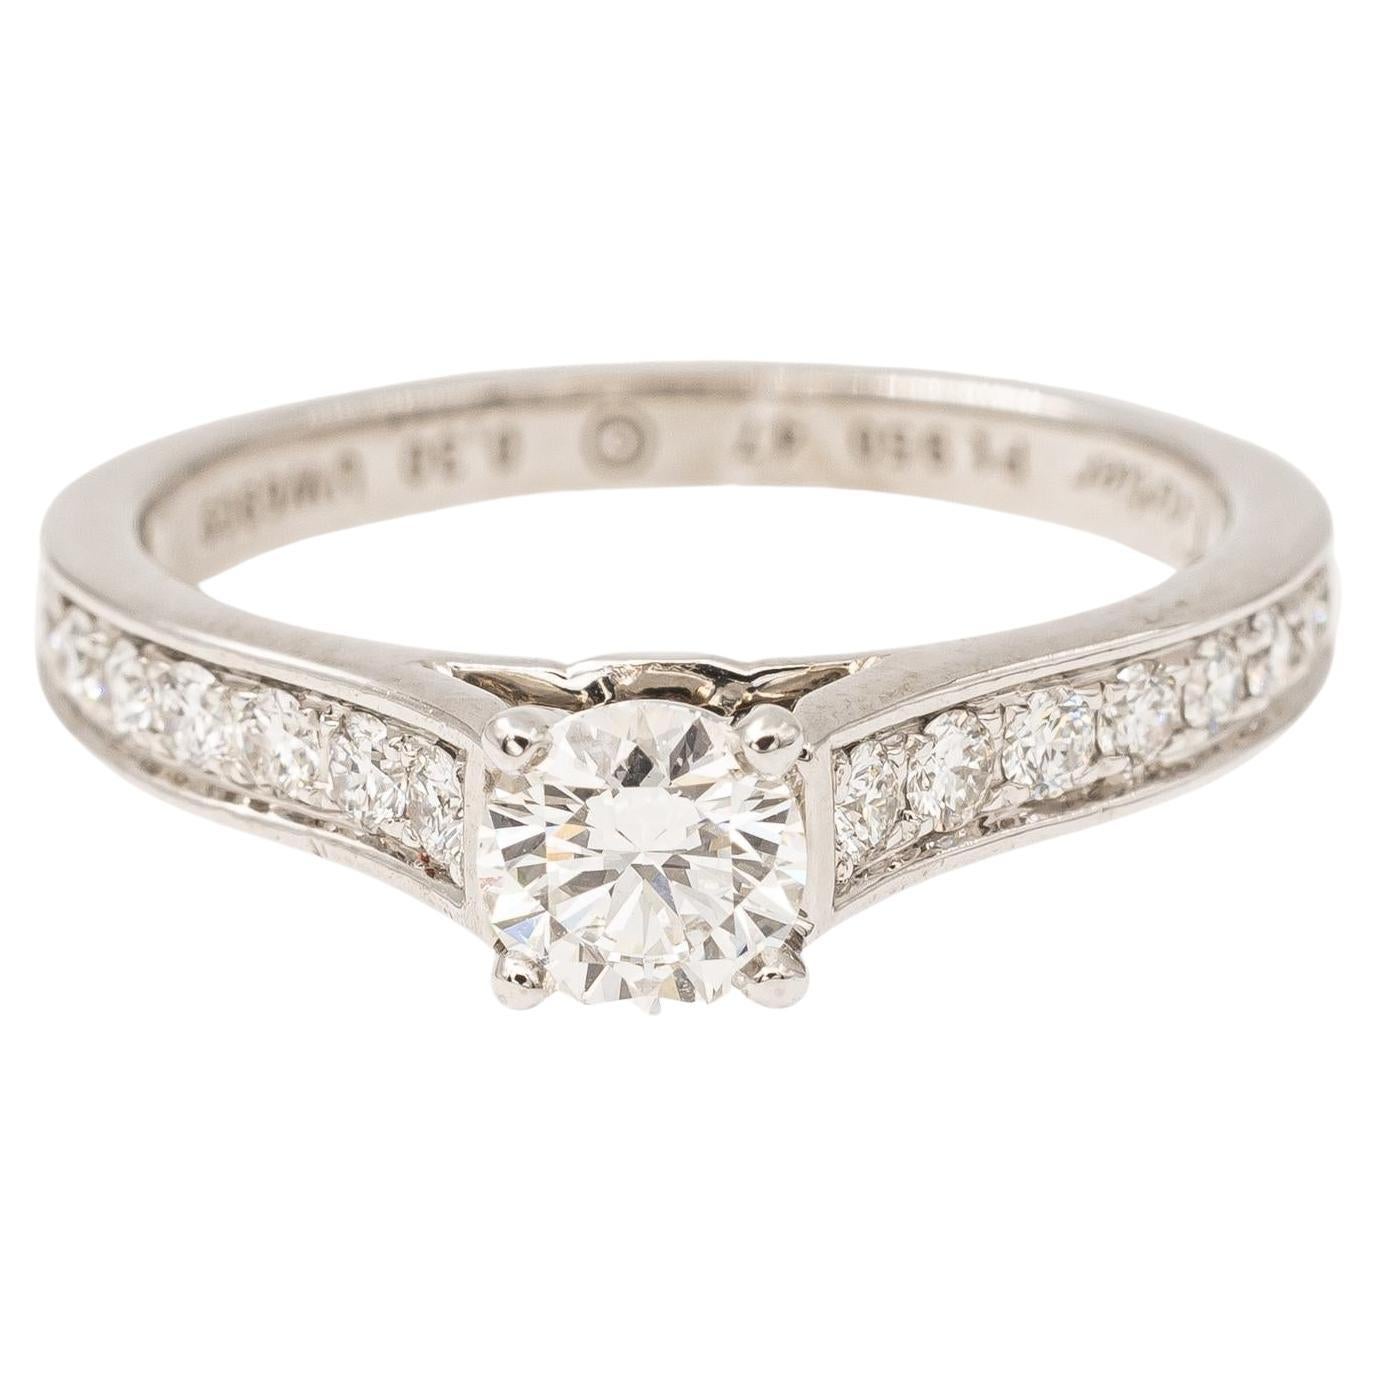 Does Cartier do custom engagement rings?